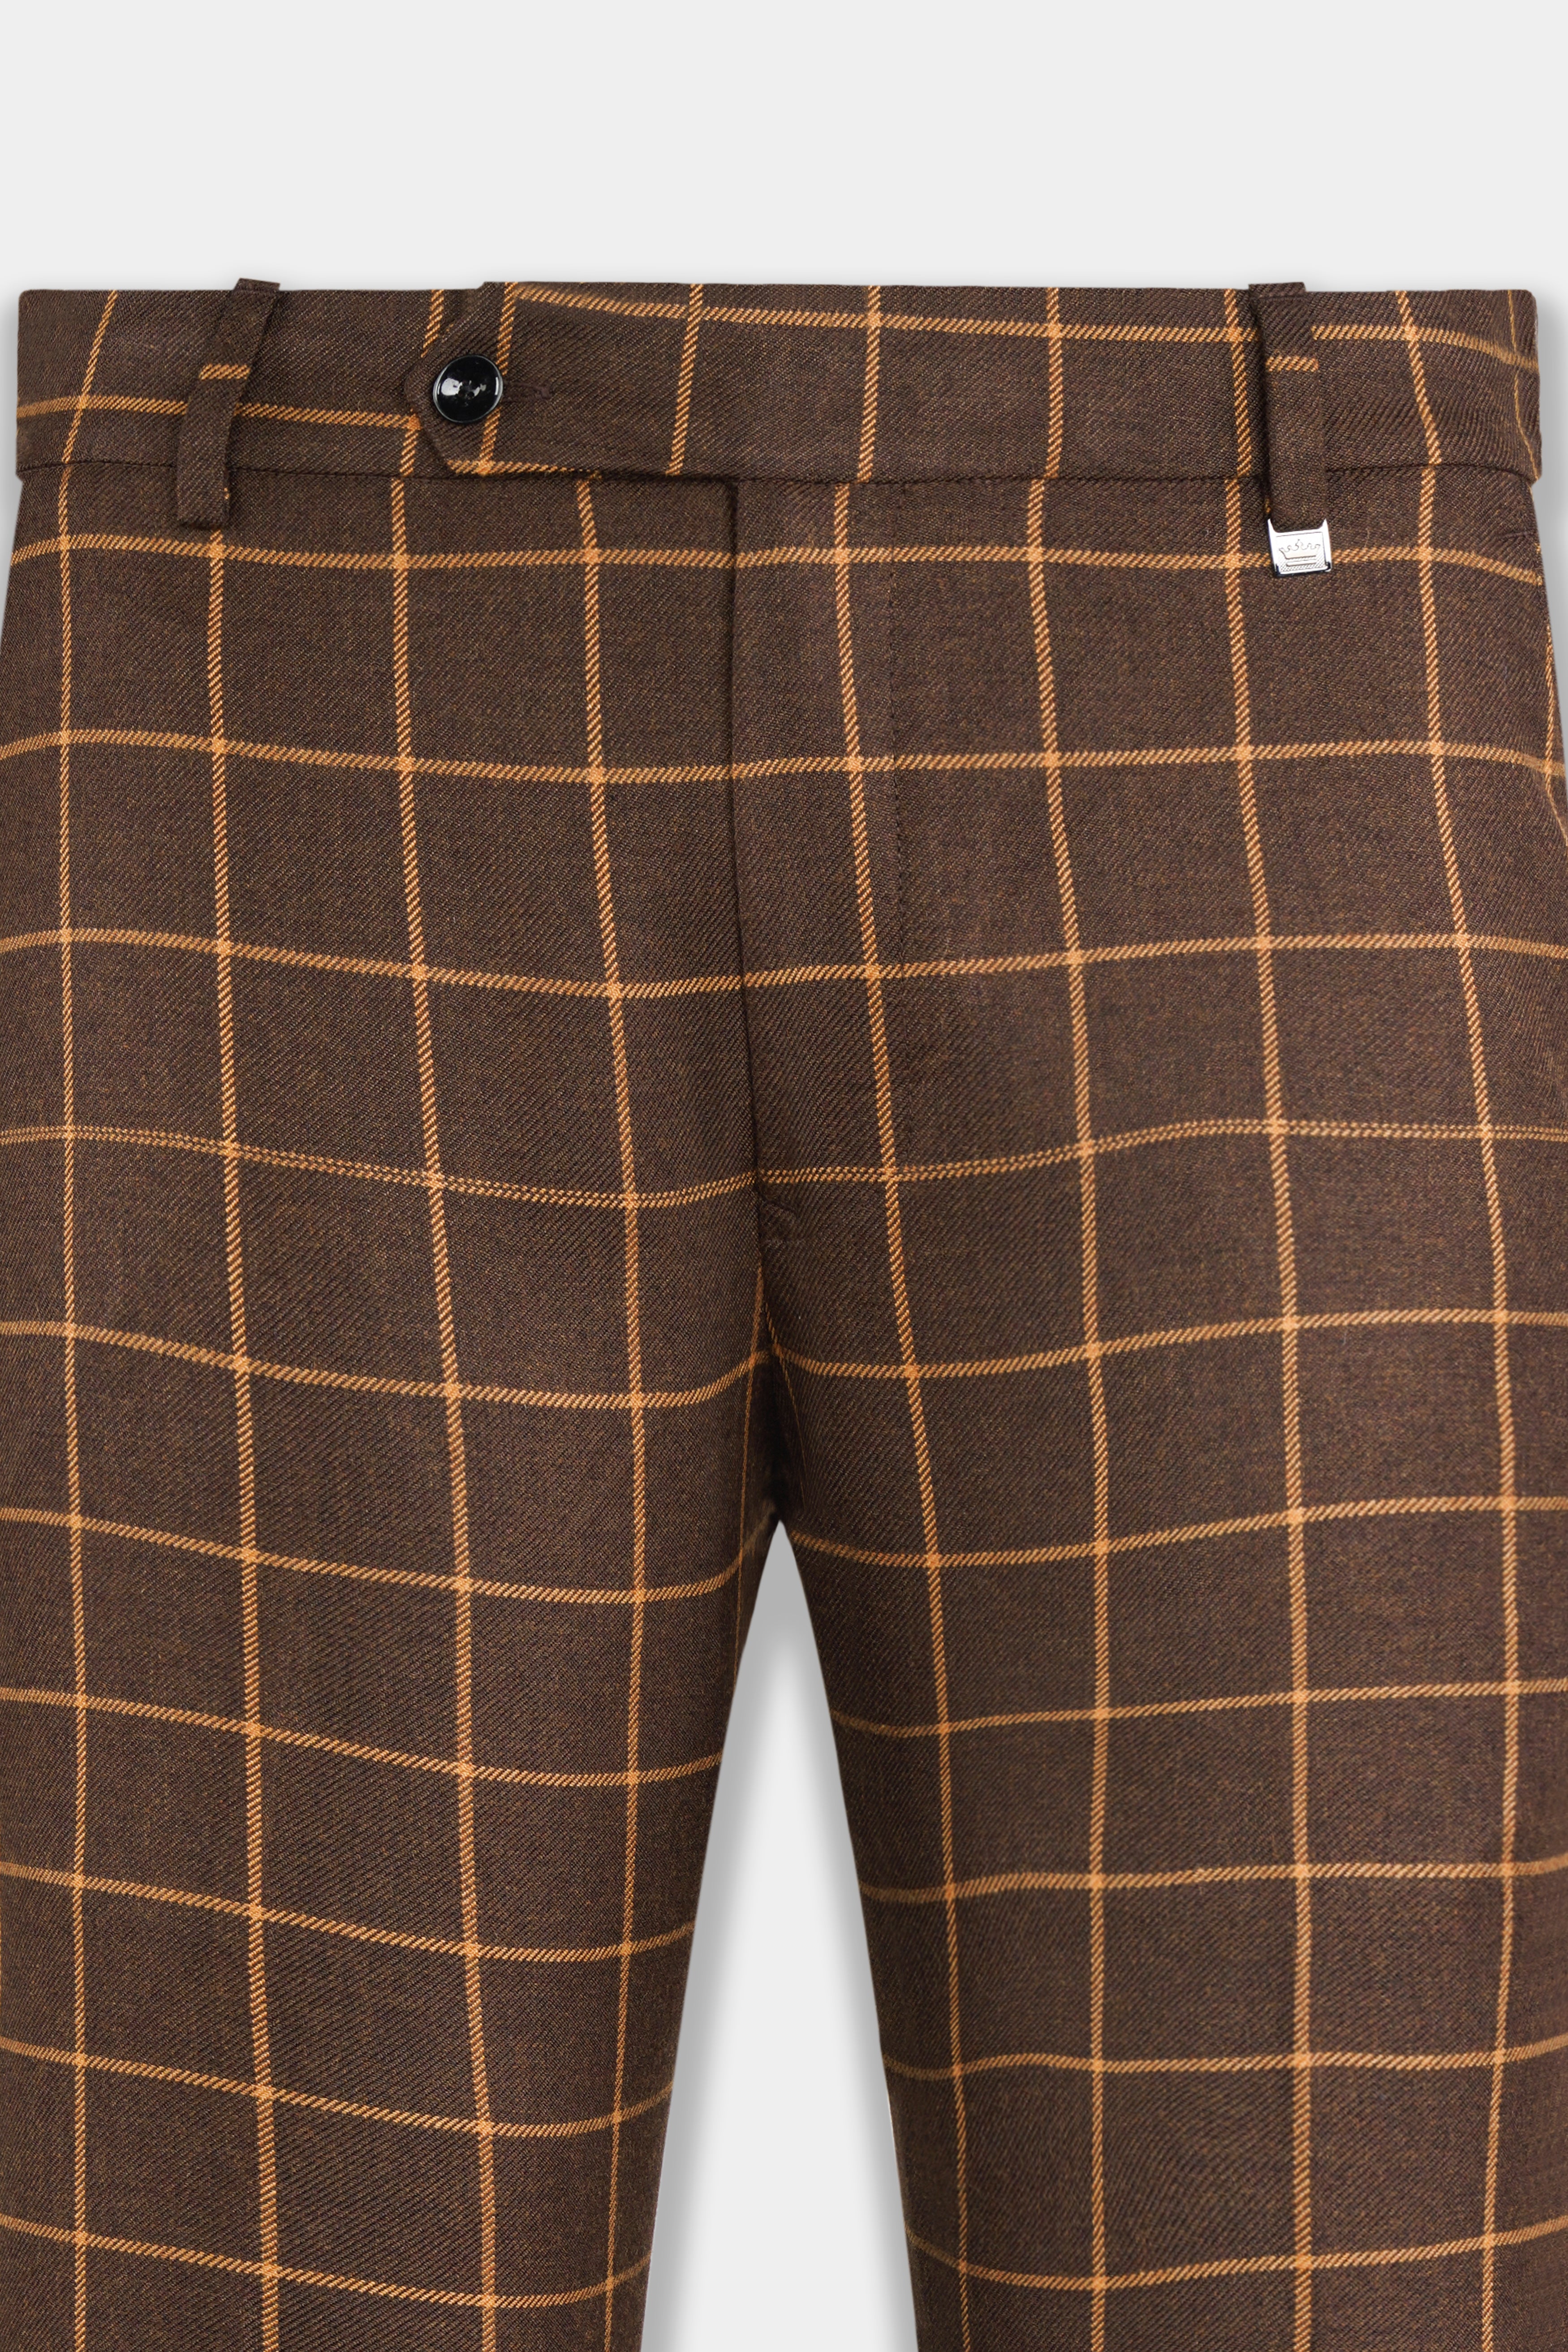 Buy Plaid Pants For Men Online In India - French Crown